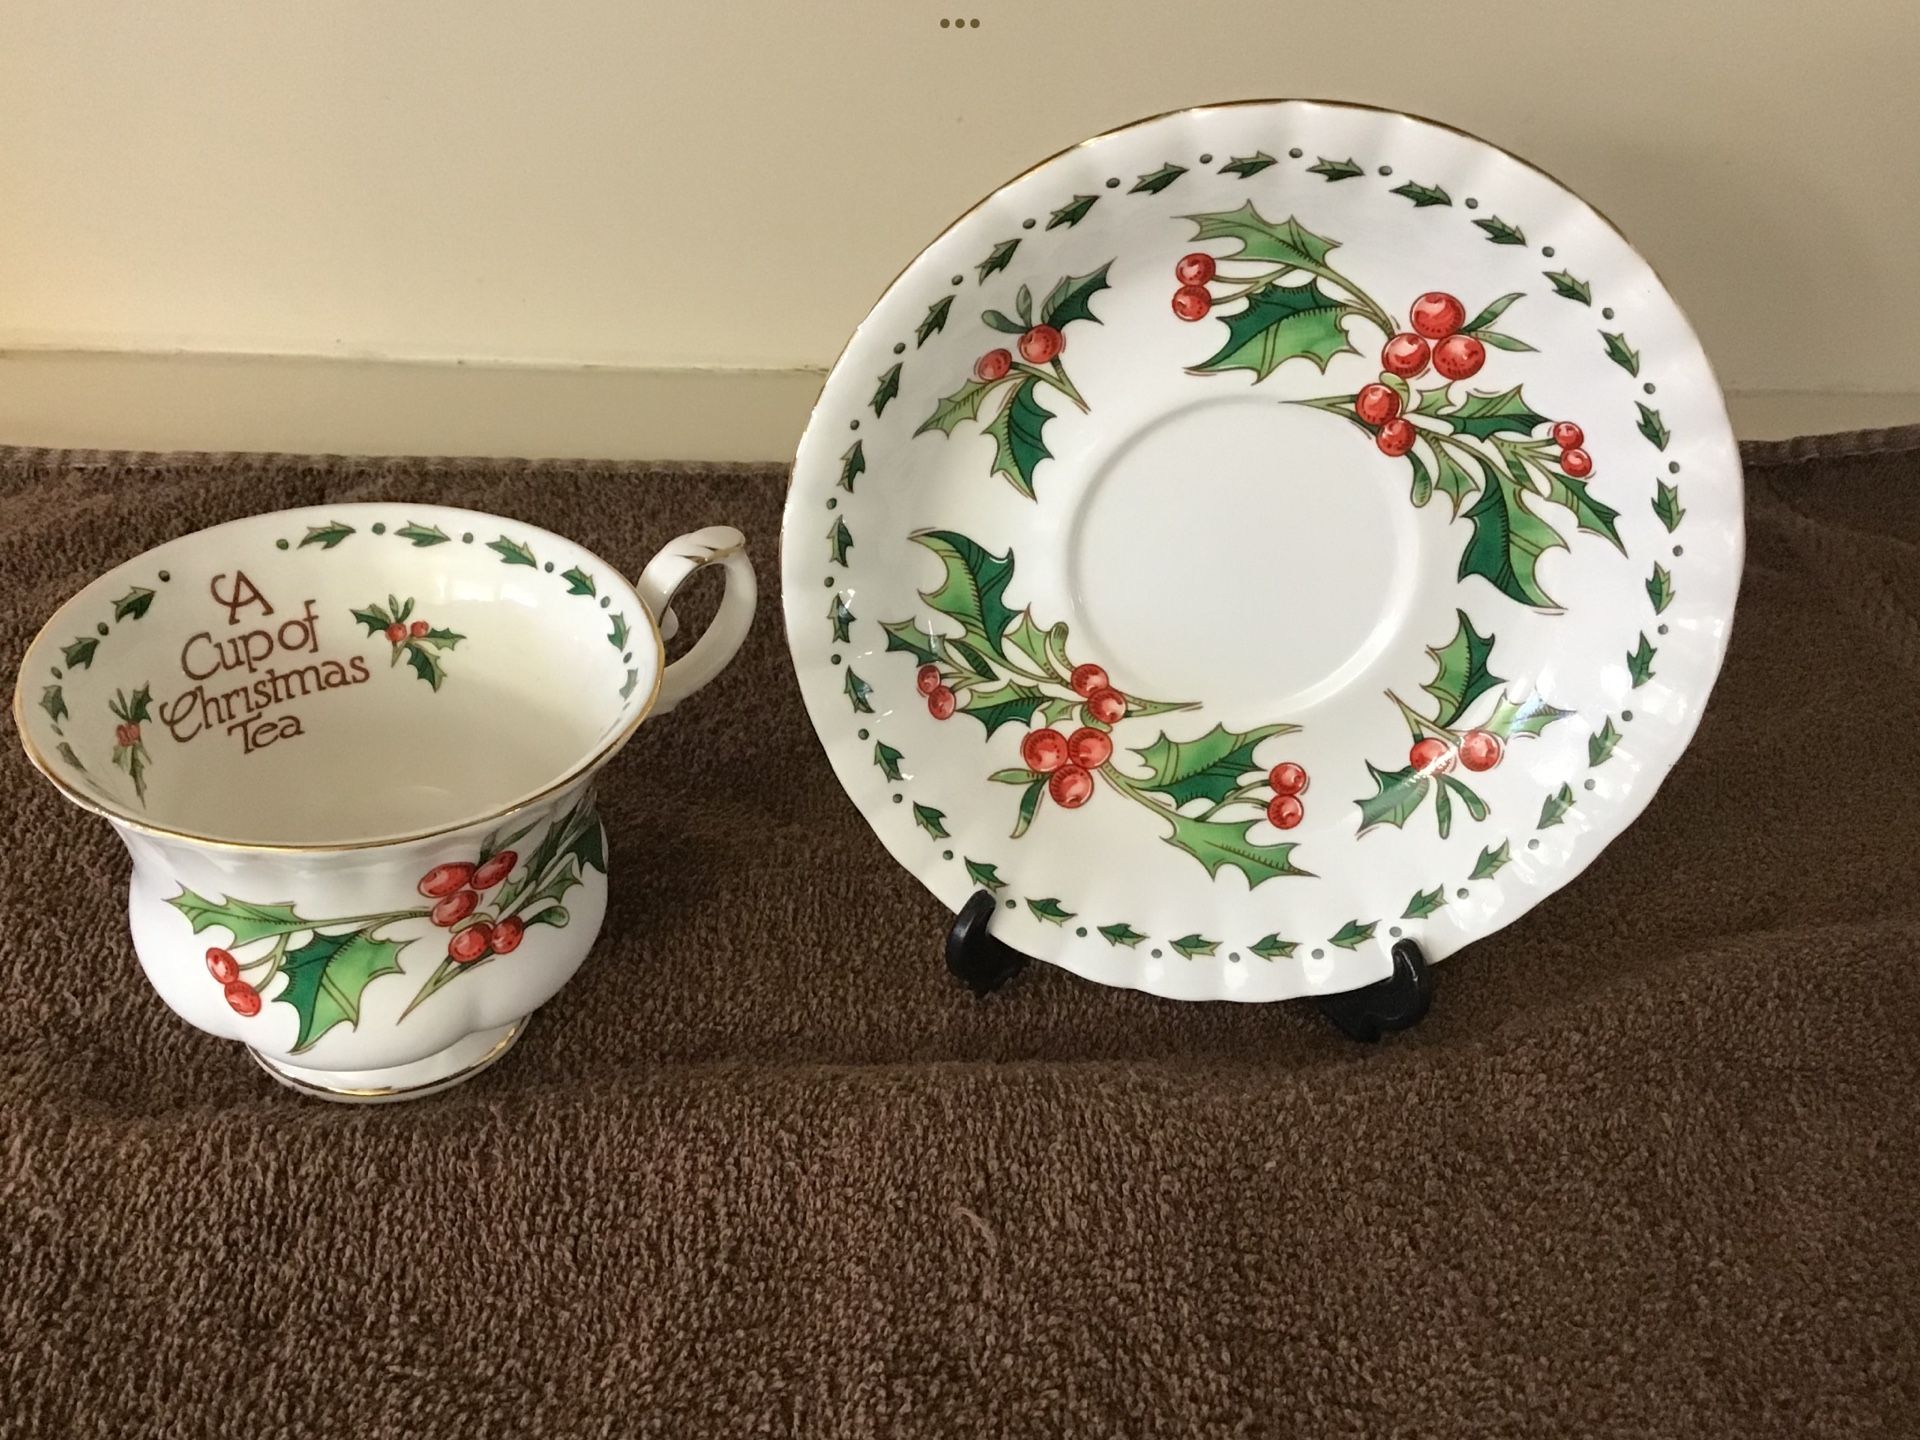 “A Cup Of Christmas Tea” (based  on the book) ) Saucer + Cup 1992 Bone China Holly Graphics 